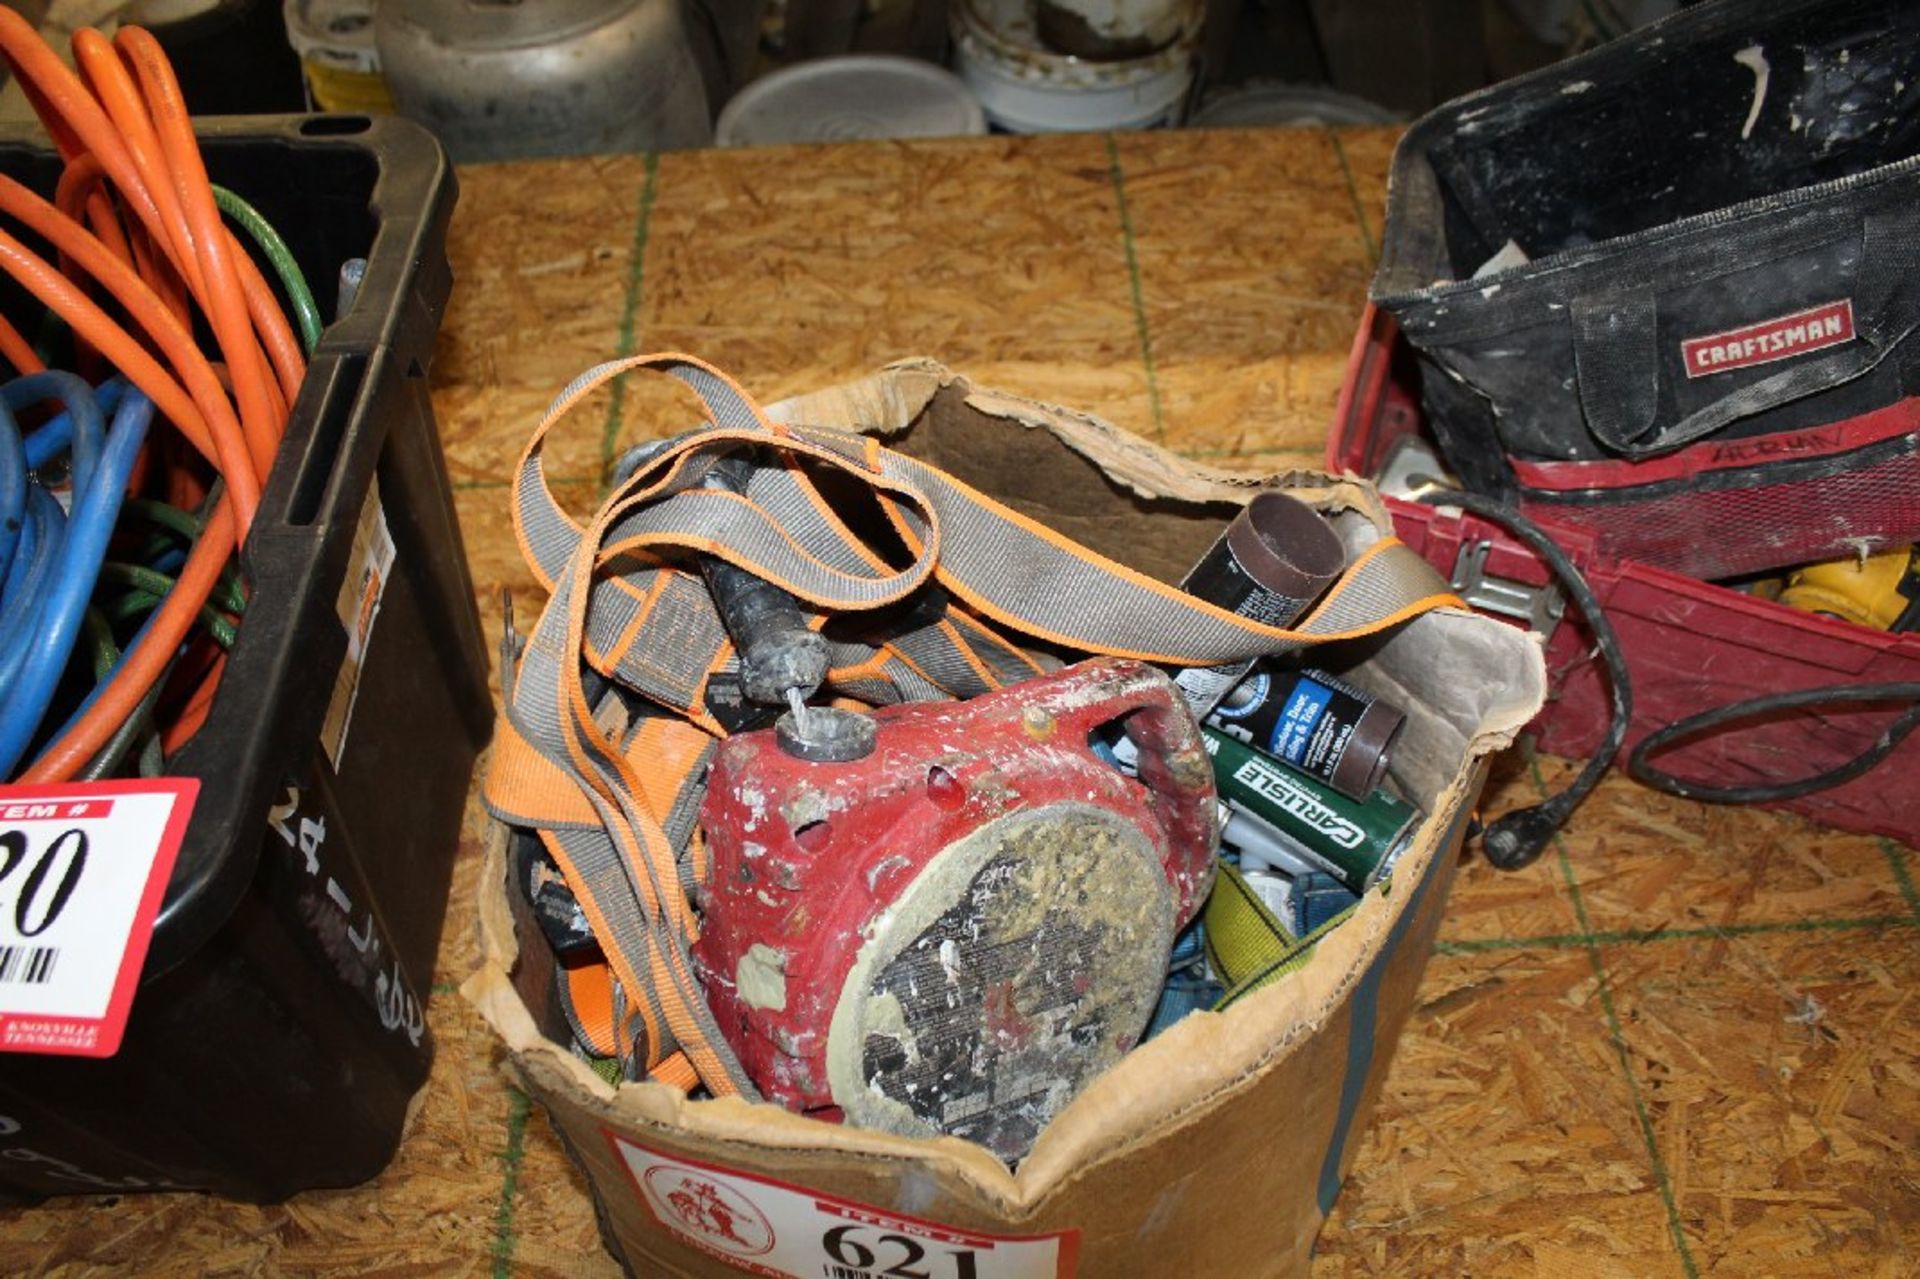 Contents of Box, Safety Harnesses & Fall Protection Gear - Image 2 of 2